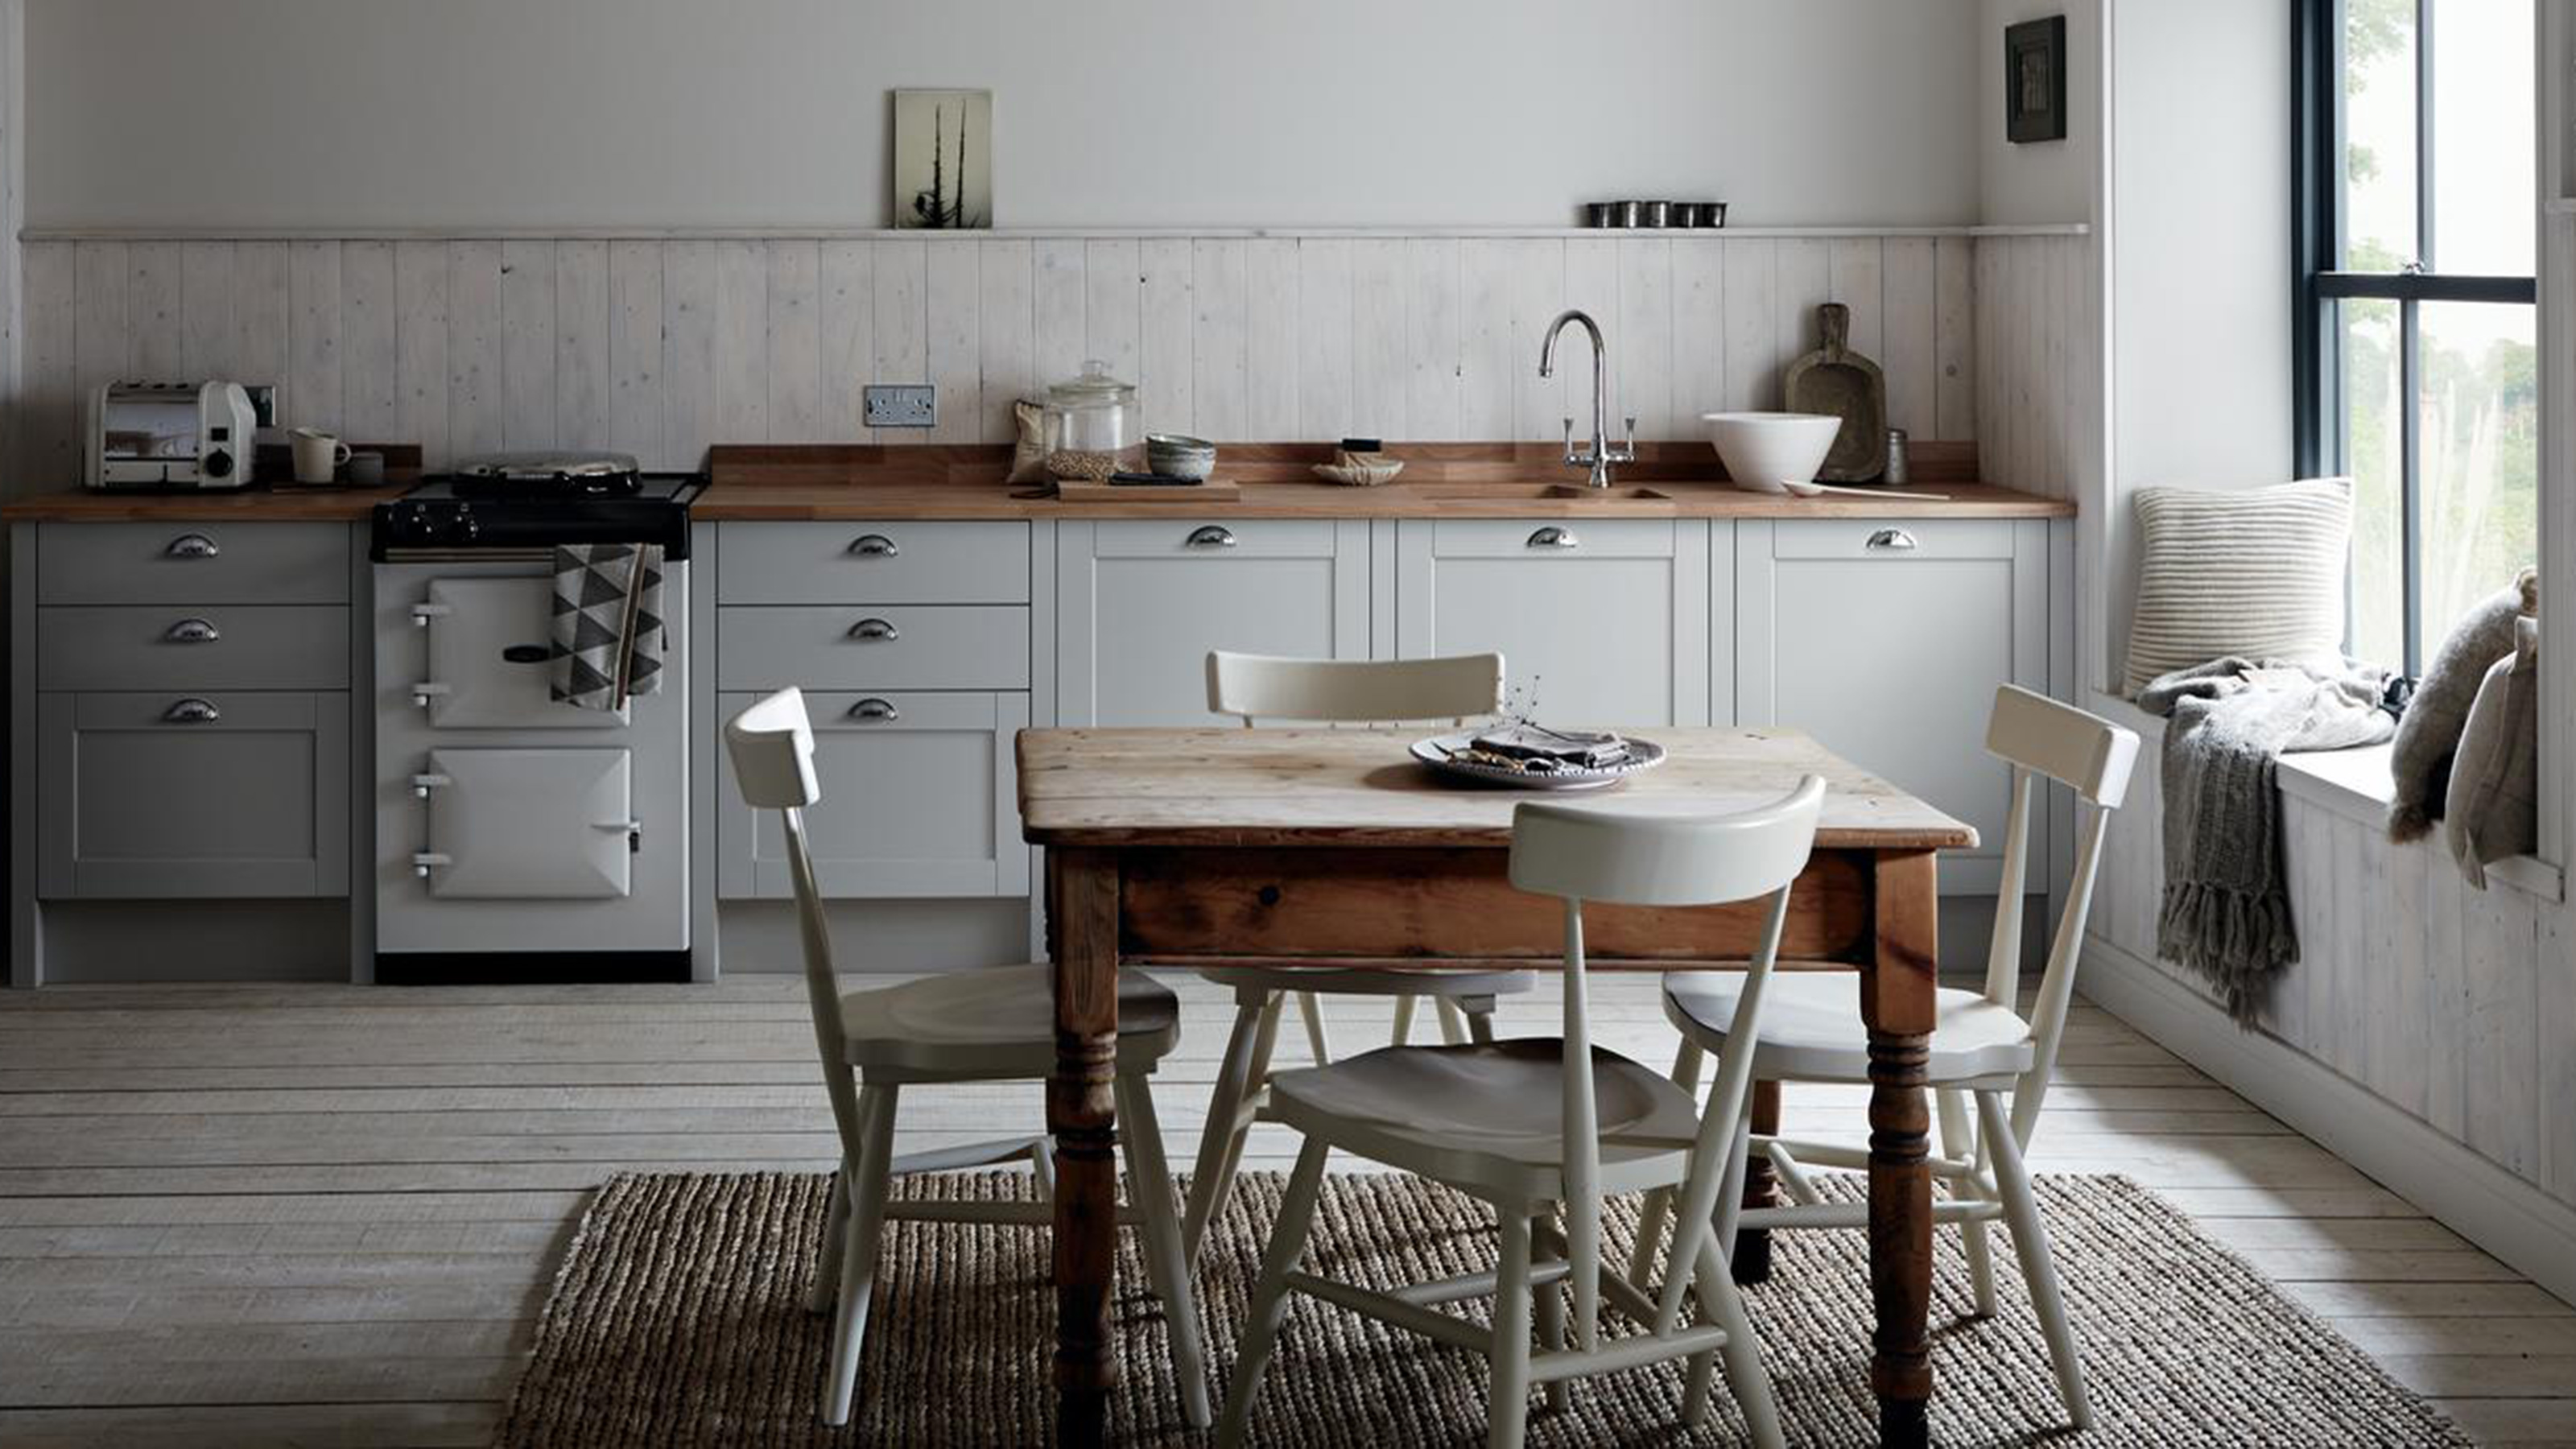 When did play kitchens become so chic?